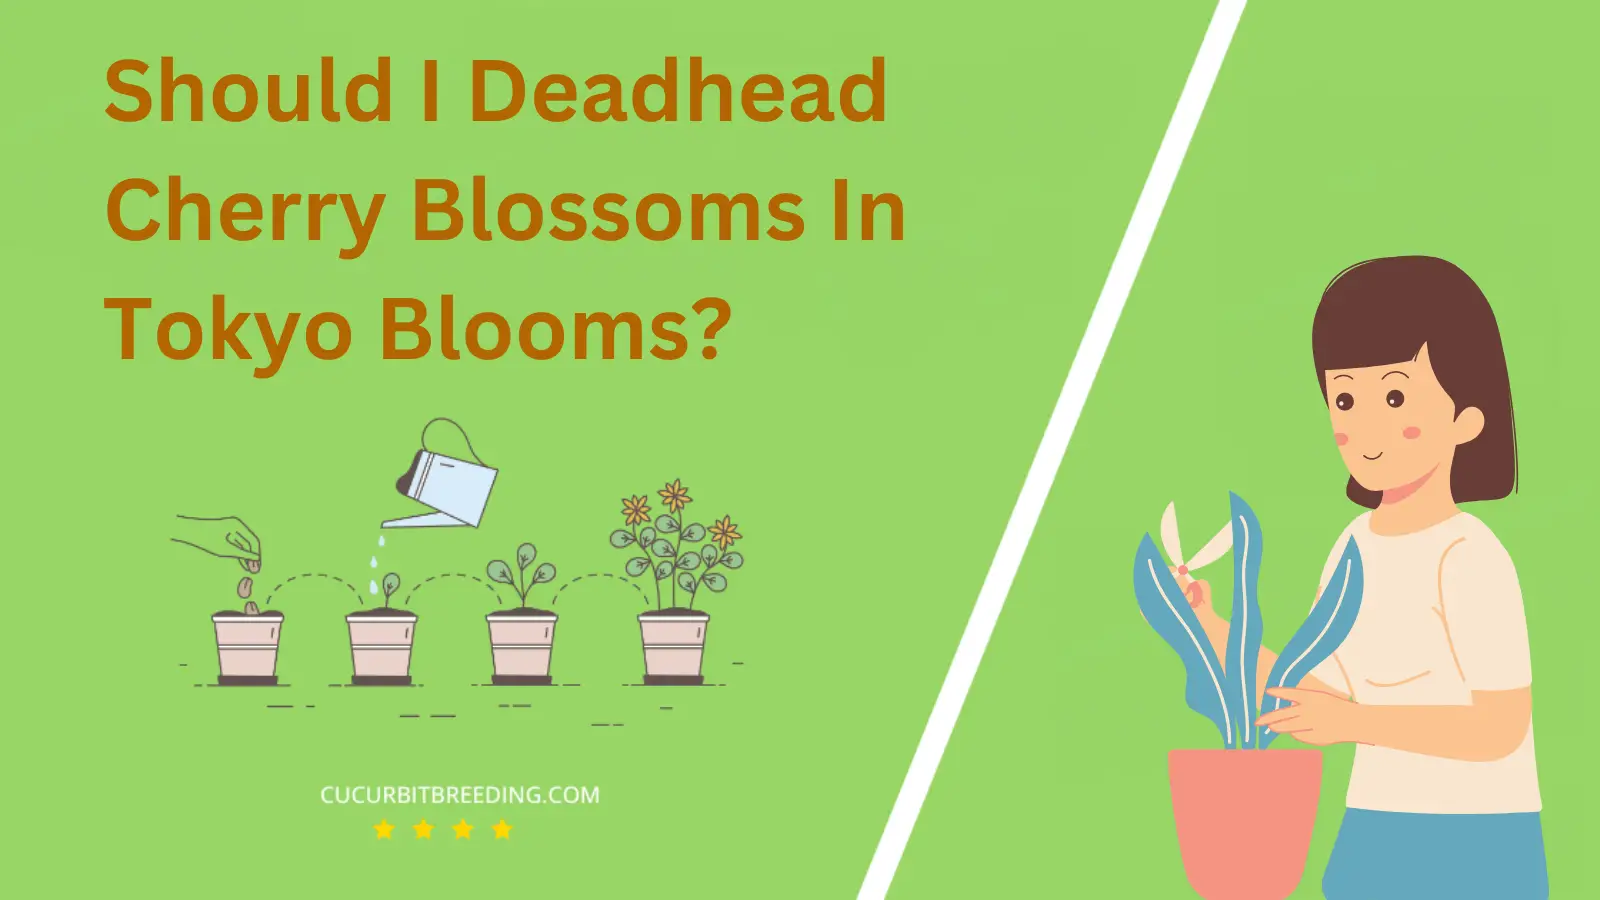 Should I Deadhead Cherry Blossoms In Tokyo Blooms?